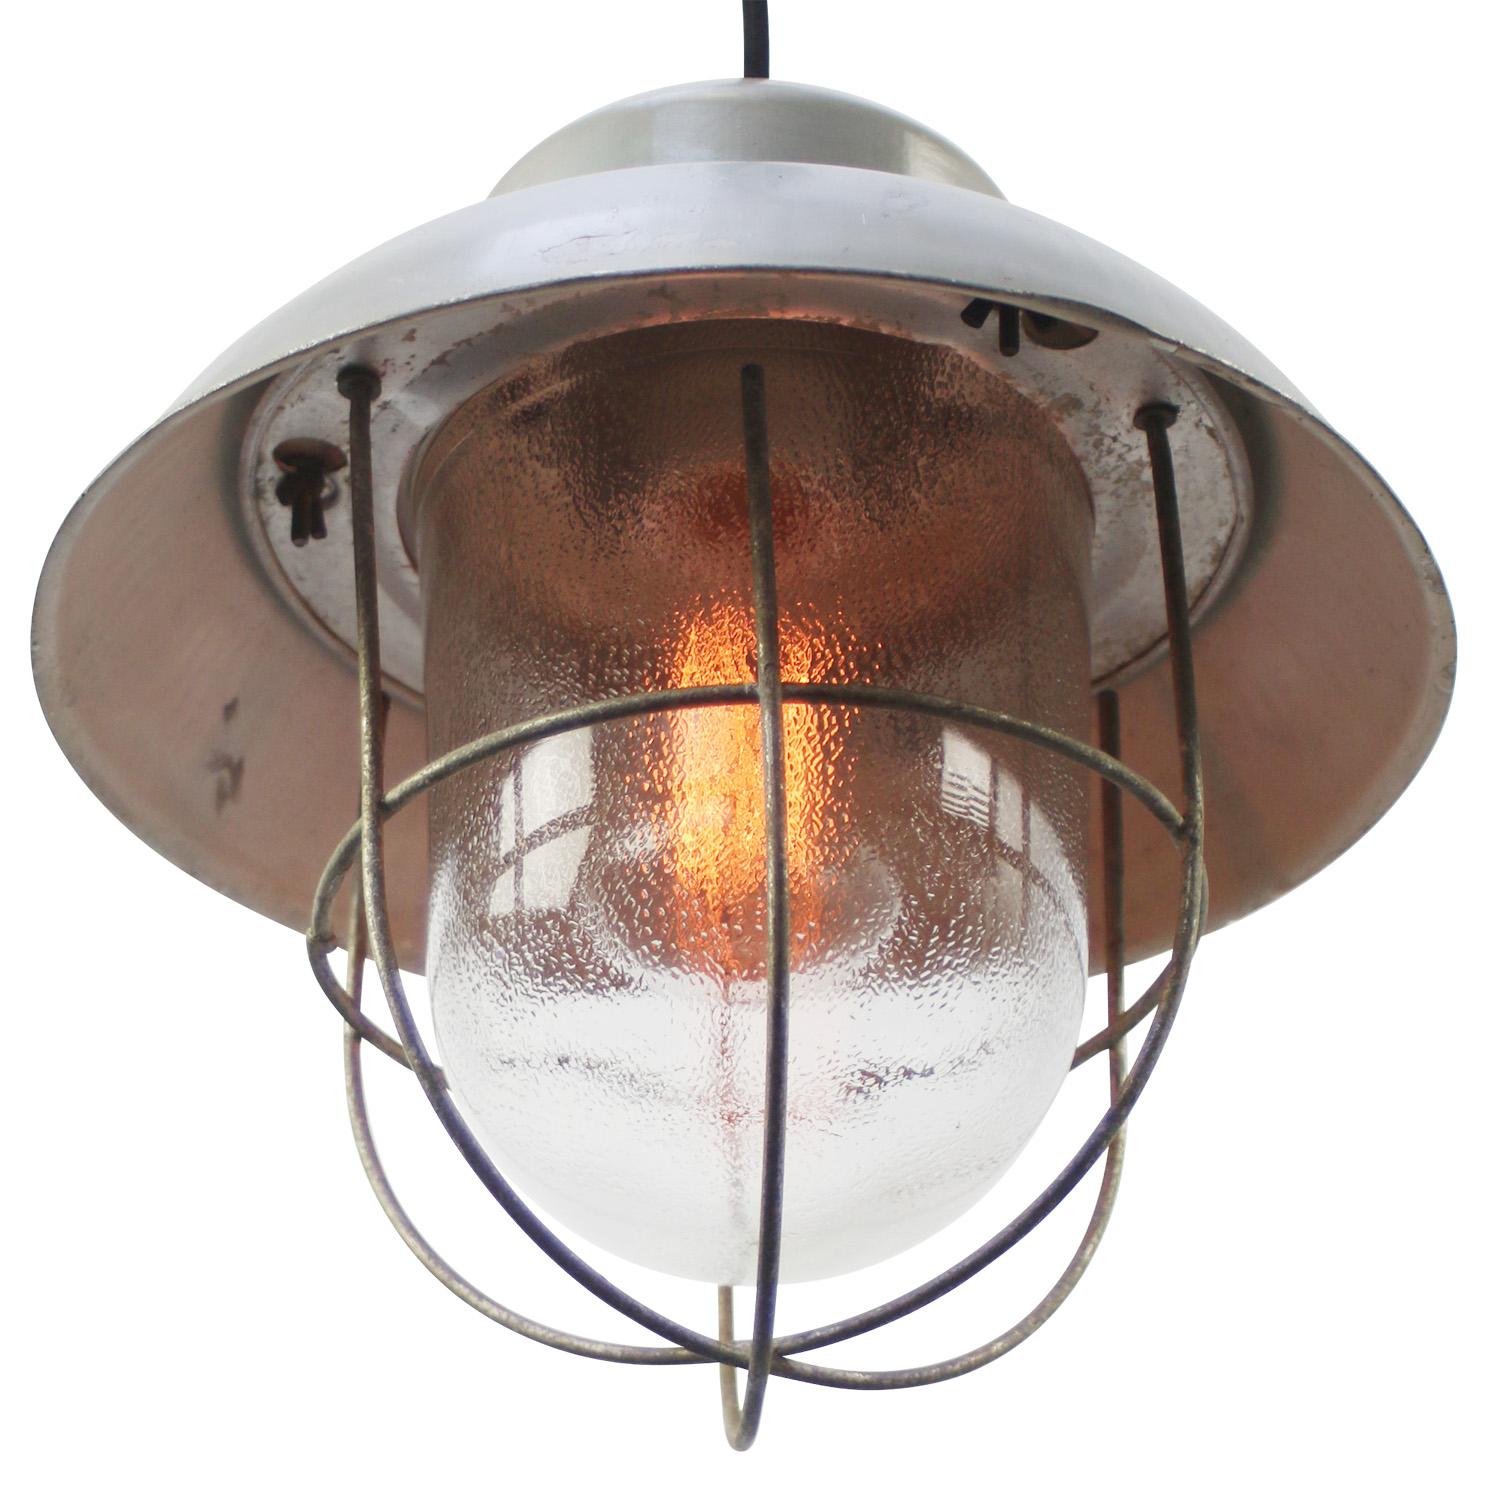 Aluminum industrial pendant lamp
frosted glass with cage 

Weight 2.00 kg / 4.4 lb

Priced per individual item. All lamps have been made suitable by international standards for incandescent light bulbs, energy-efficient and LED bulbs. E26/E27 bulb